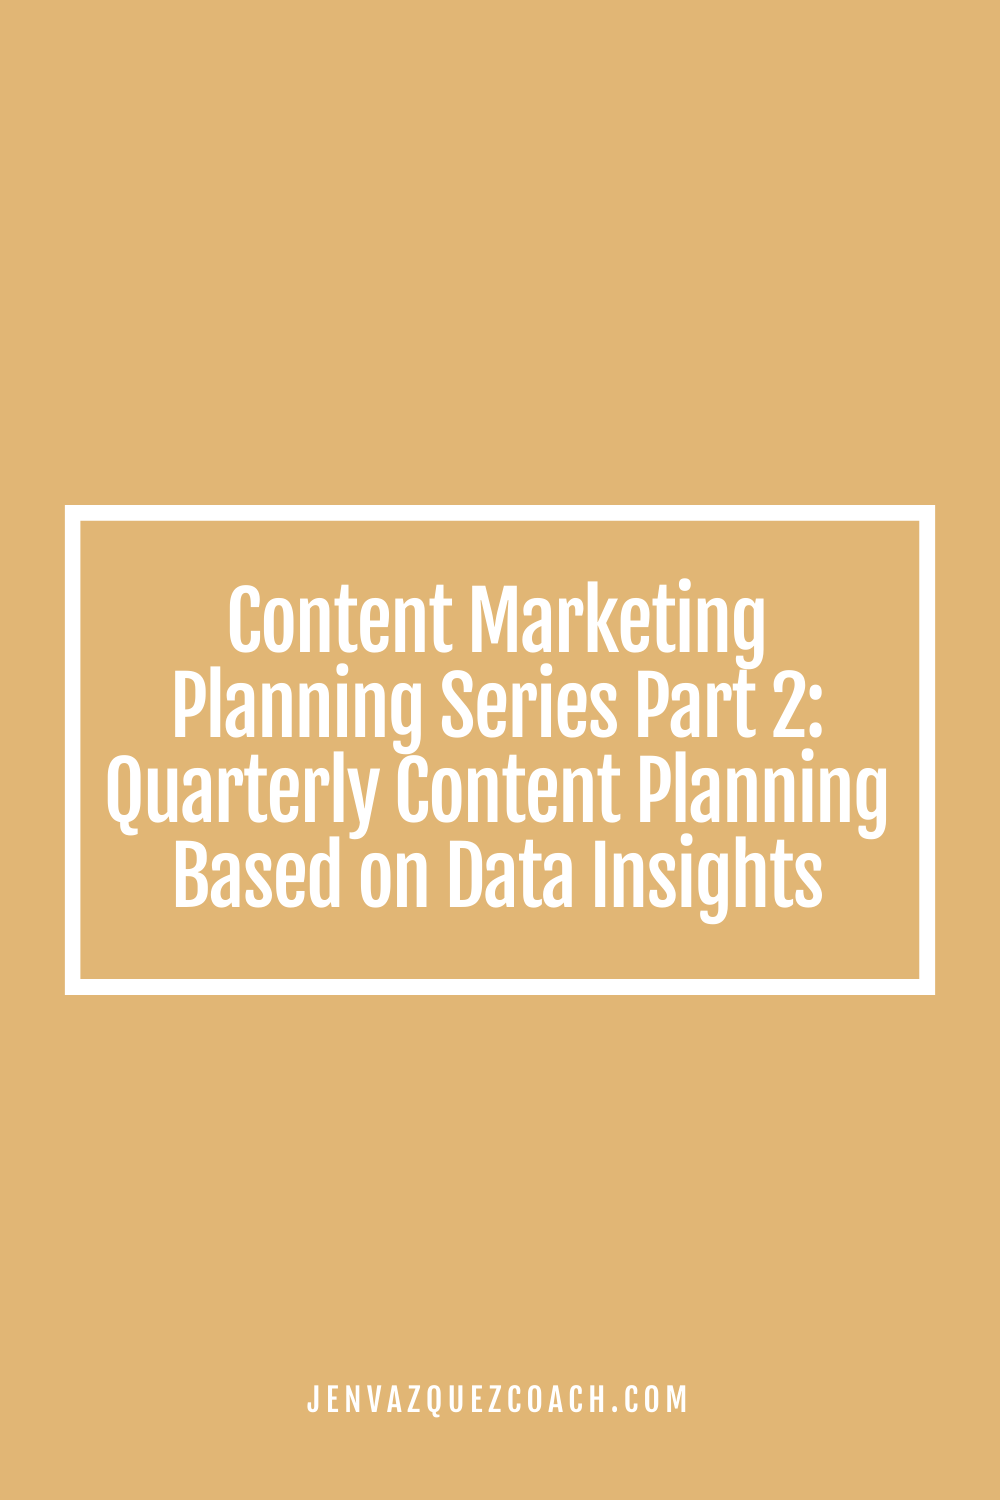 Content Marketing Planning Series Part 2: Quarterly Content Planning Based on Data Insights by Jen Vazquez Media<br />
